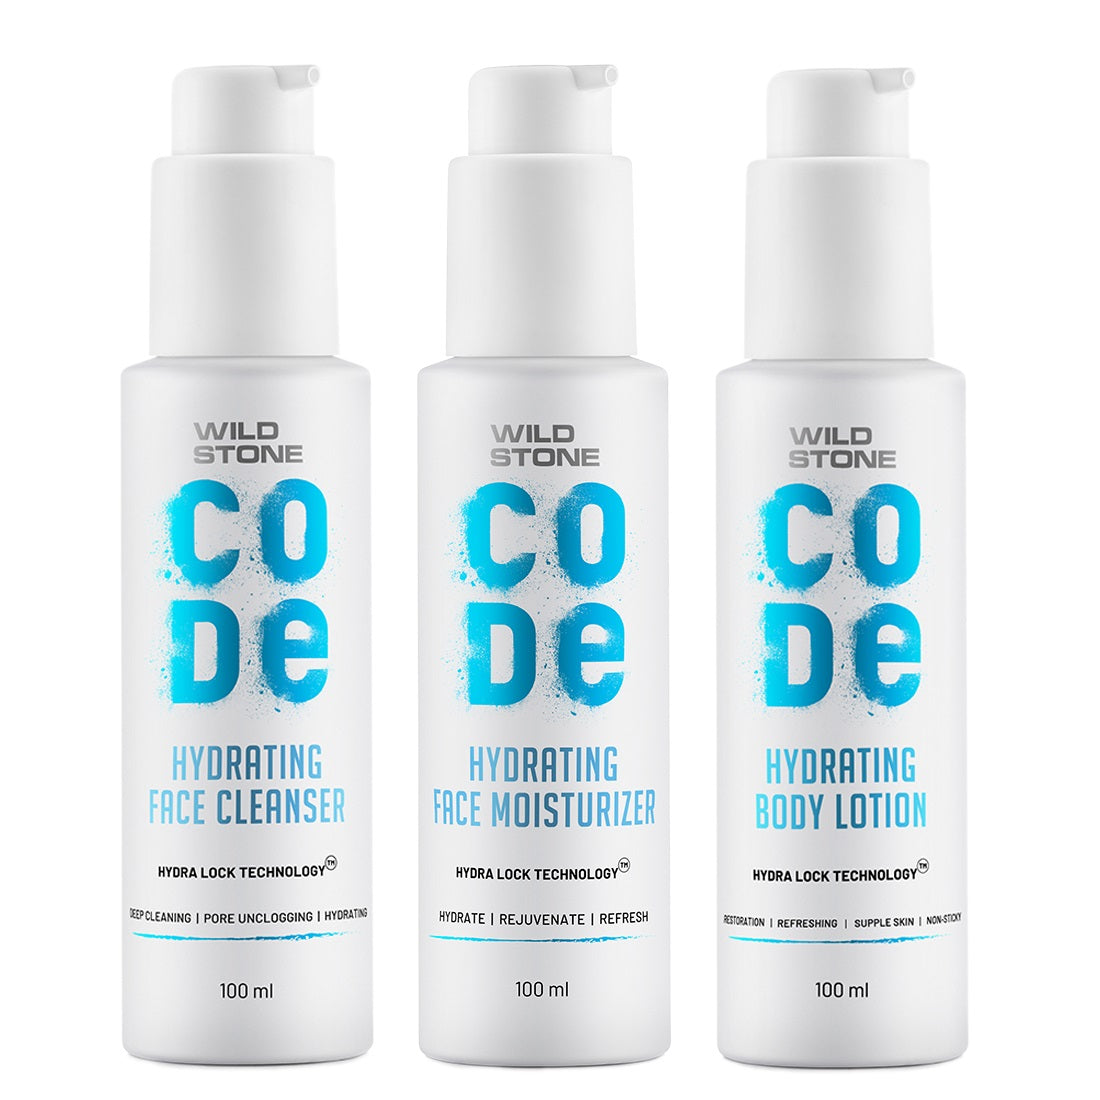 CODE face cleanser, Face moisturiser and body lotion 2